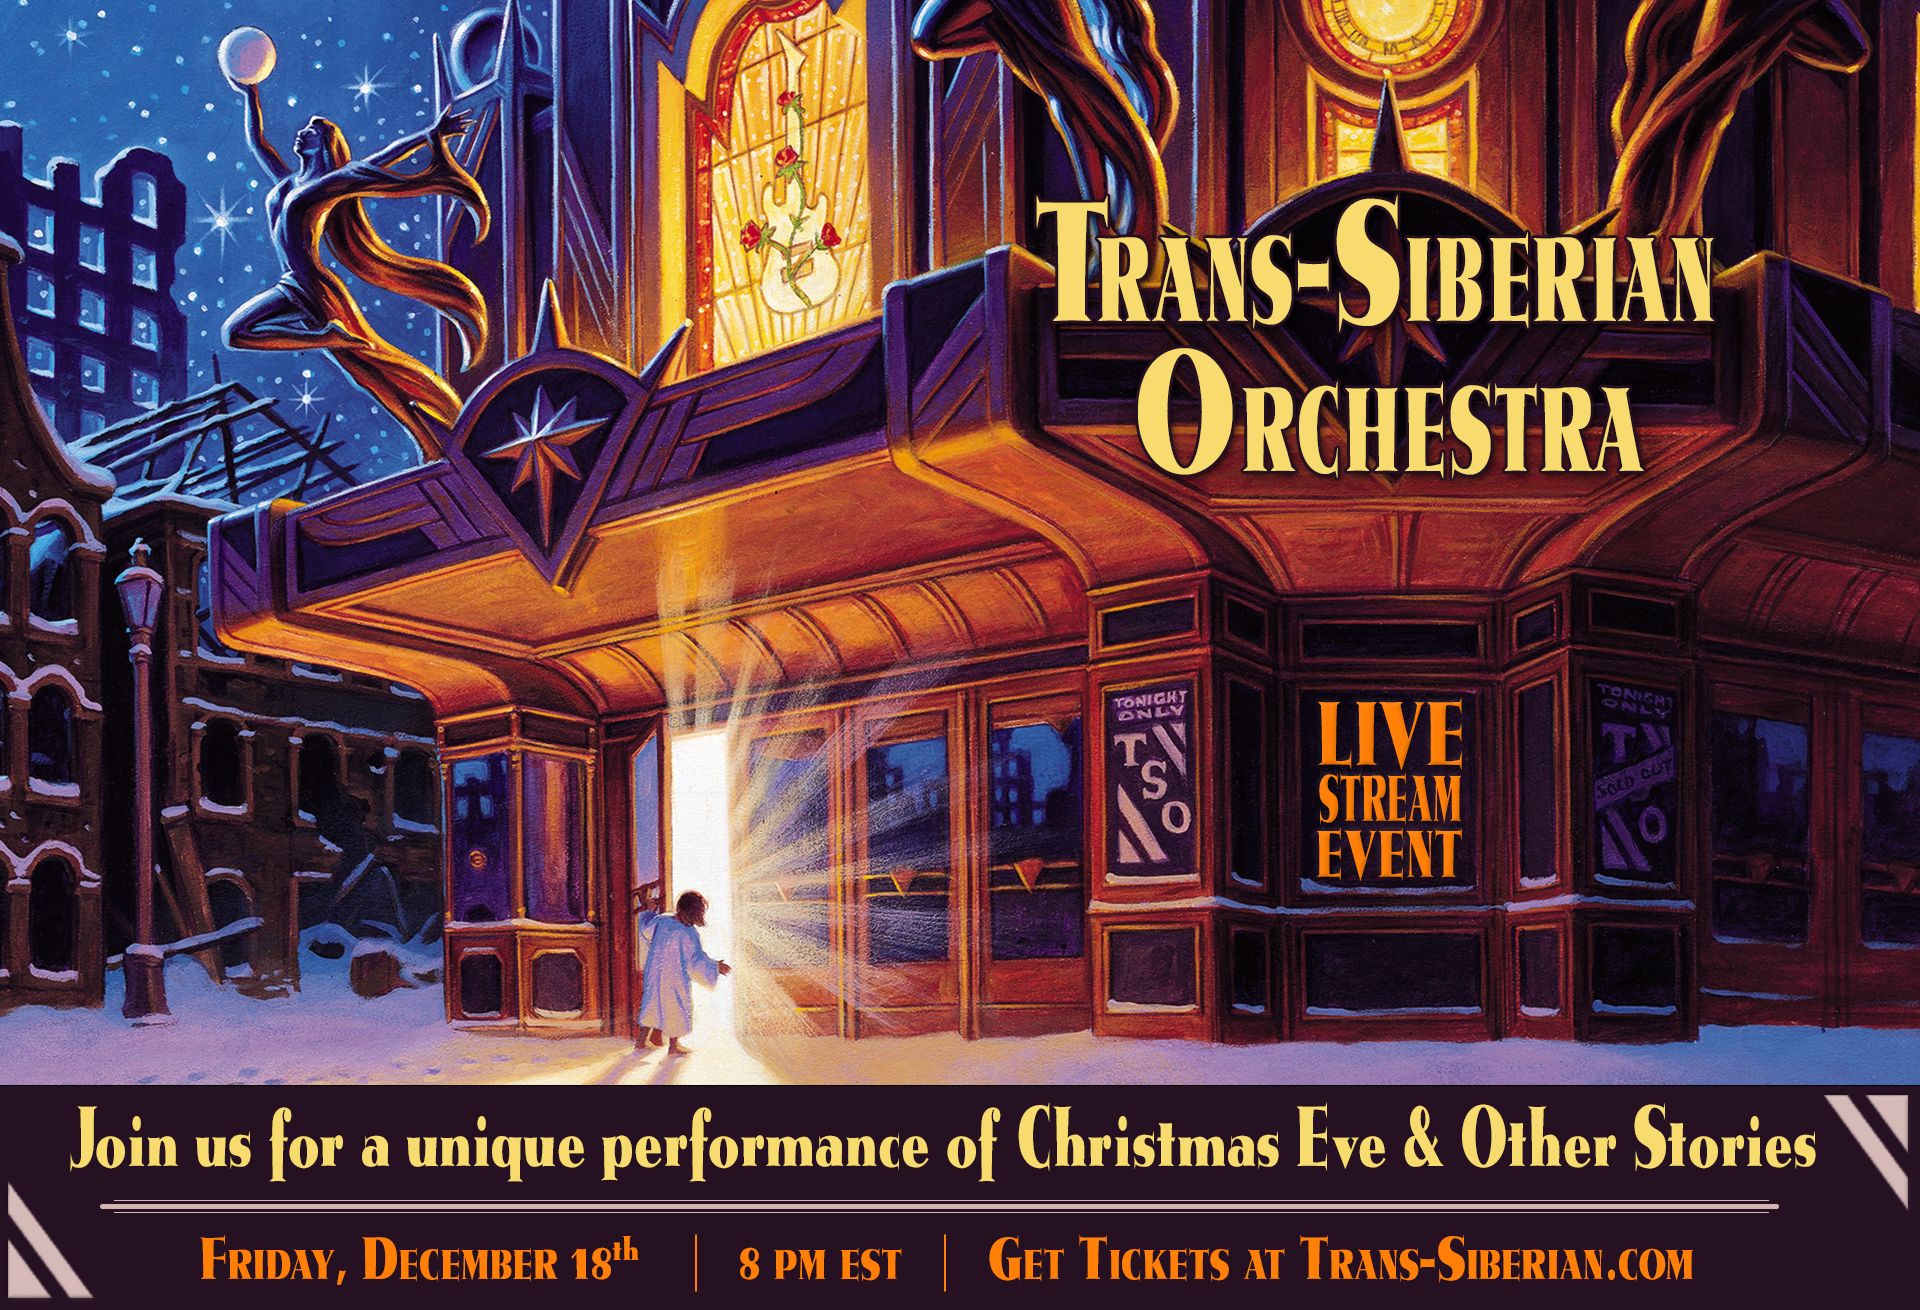 Siberian orchestra. Trans-Siberian Orchestra - the Lost Christmas Eve. Картинки Trans Siberian Orchestra. Christmas Eve and other stories Trans-Siberian Orchestra. Trans-Siberian Orchestra album Cover.